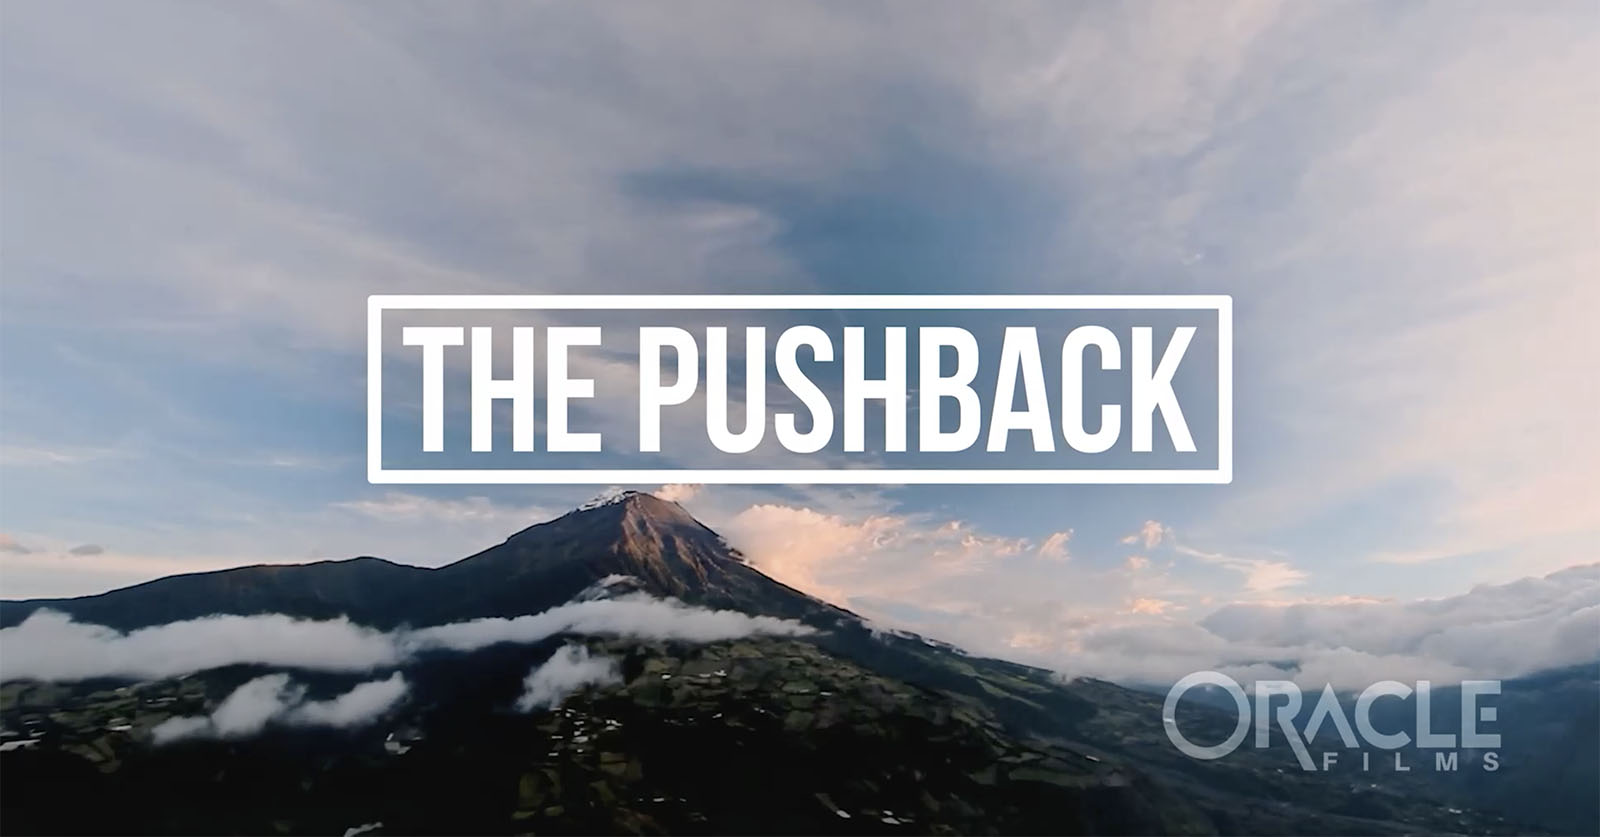 The Pushback – Oracle Films